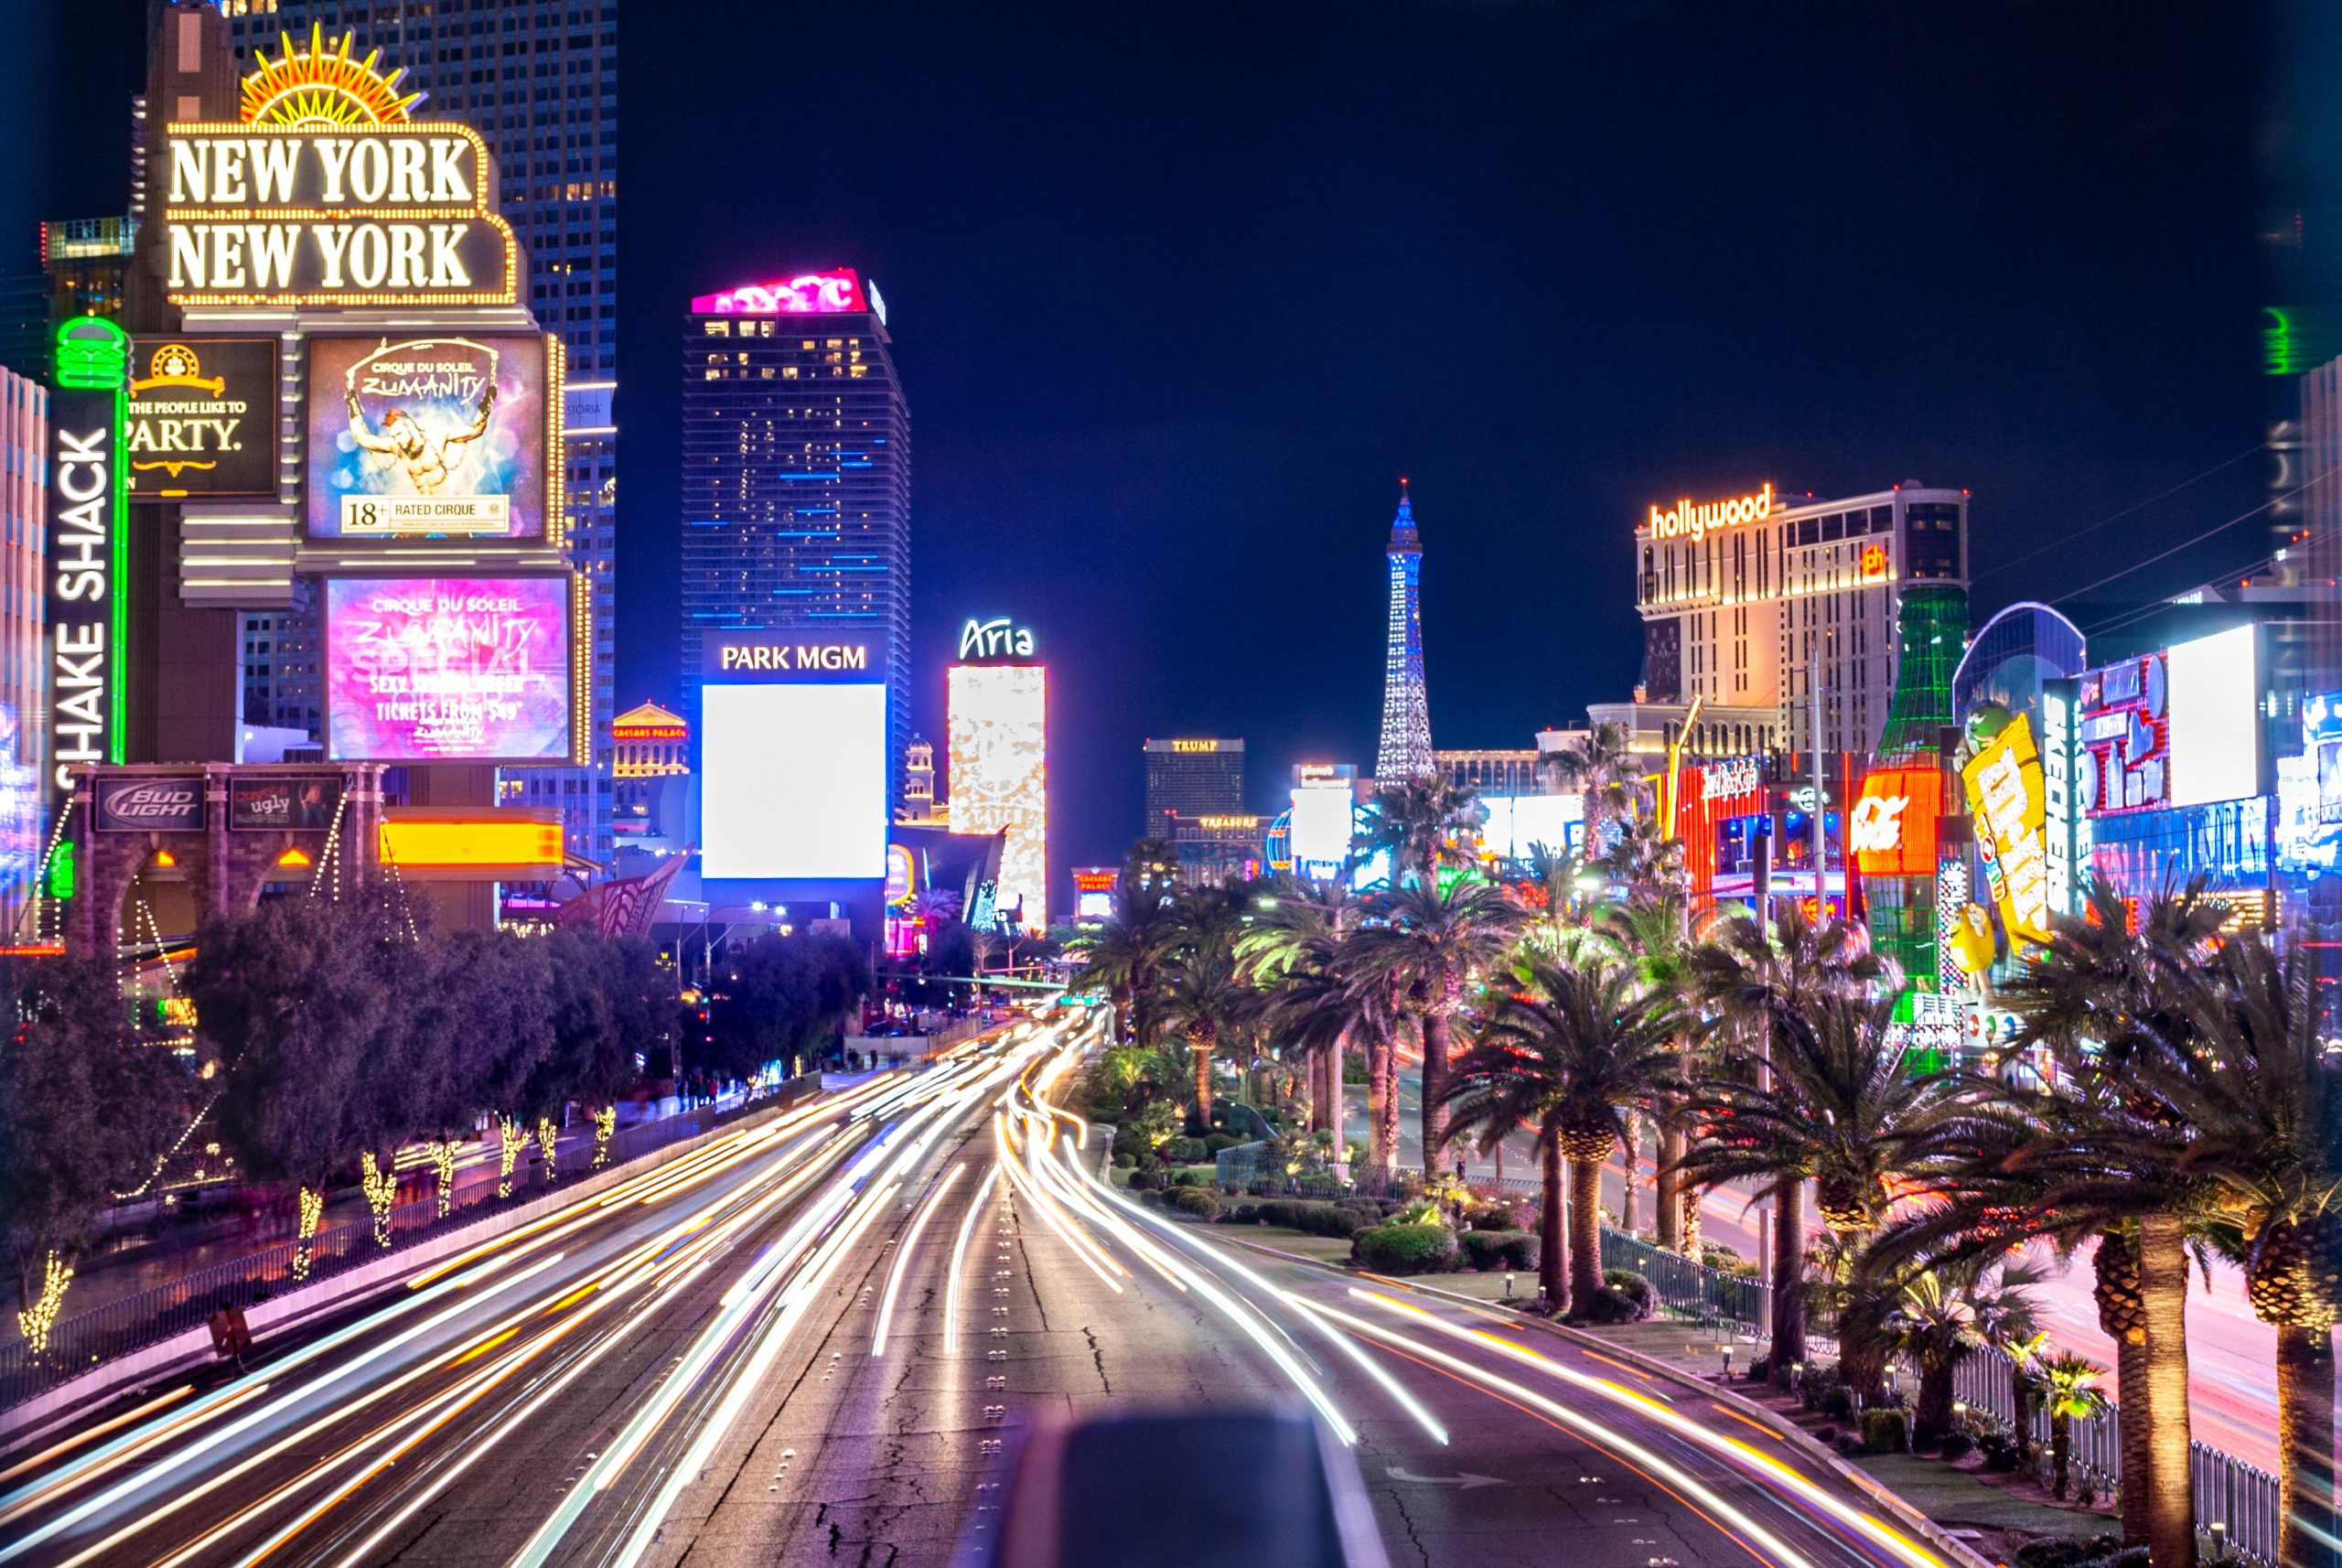 Las Vegas Travel Guide: Things to Do, Where to Stay